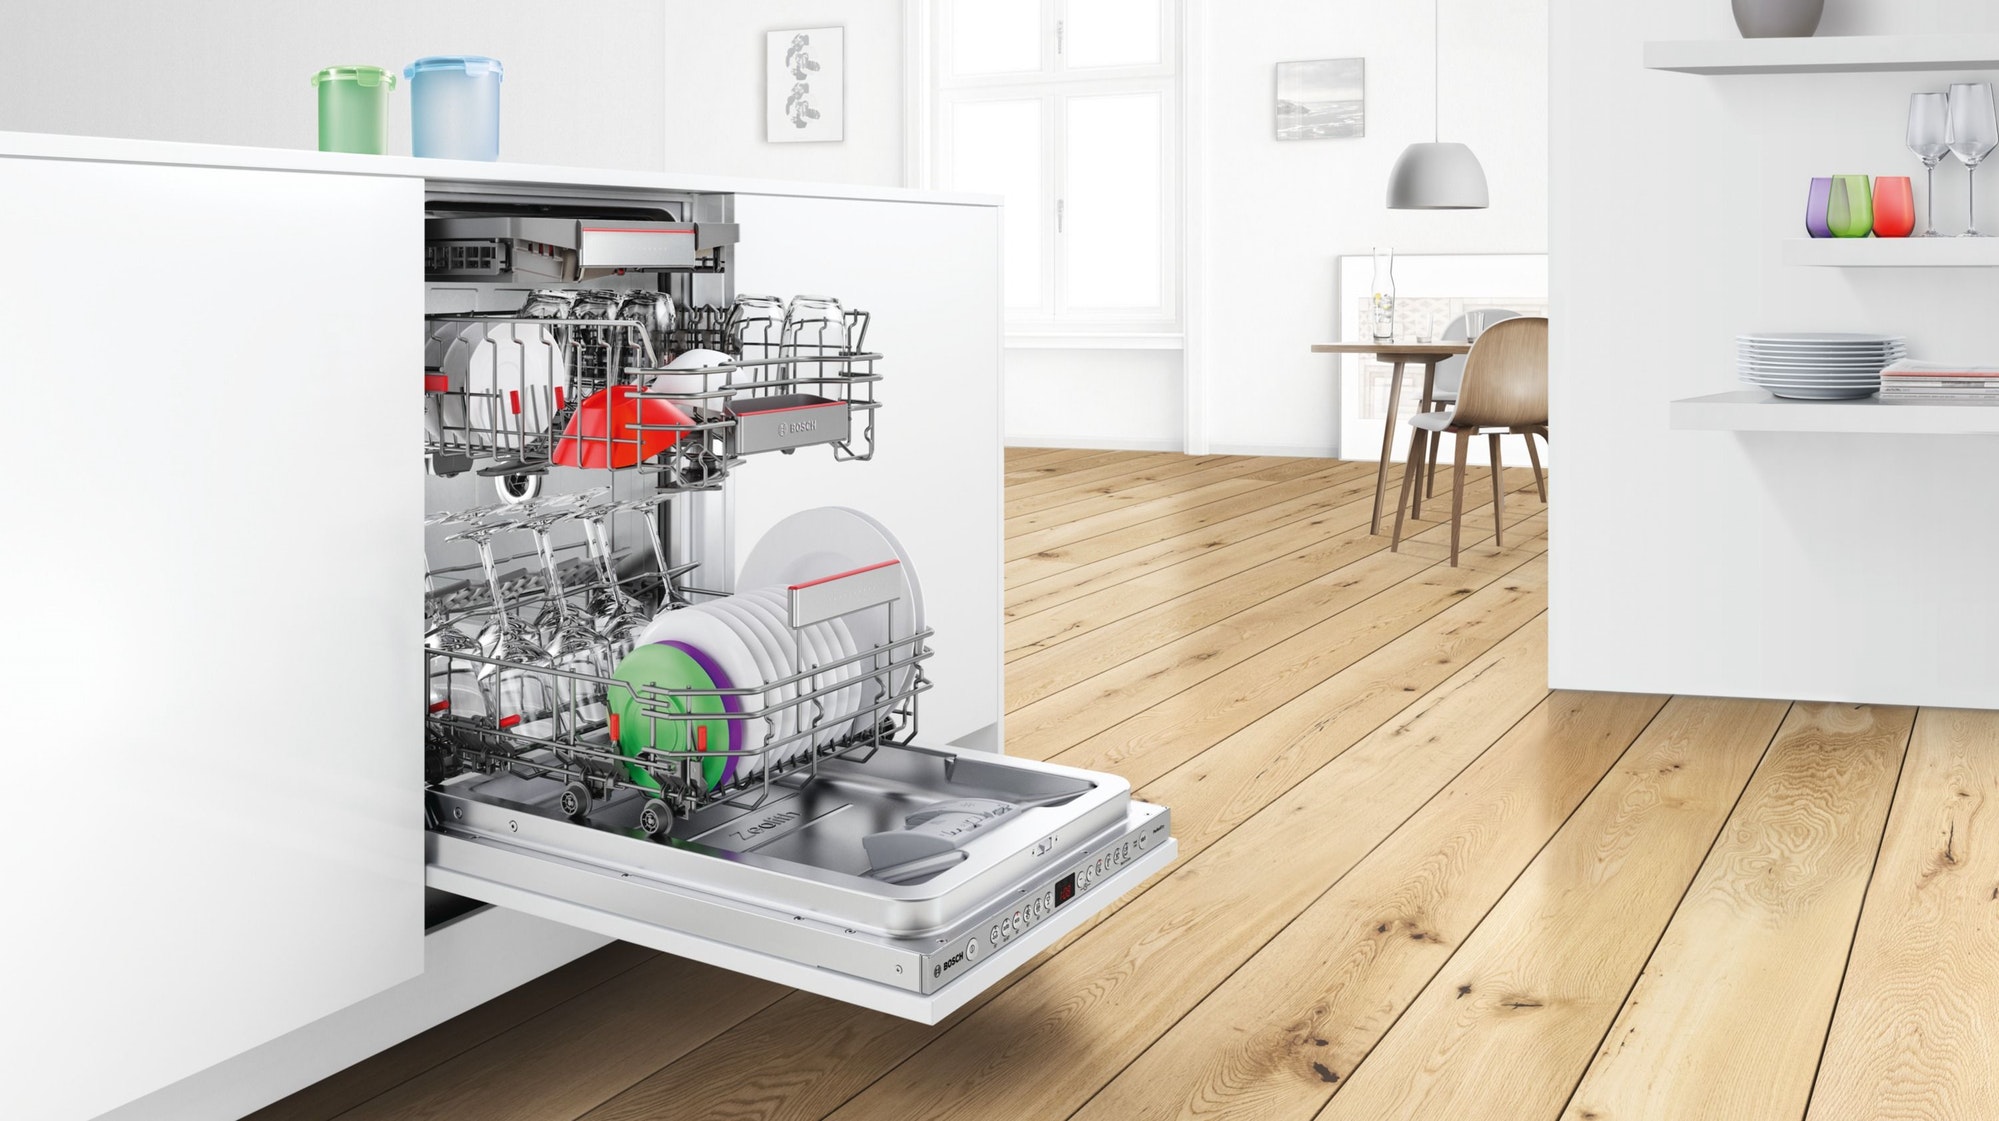 Things to Keep in Mind when Shopping for a Bosch Dishwasher